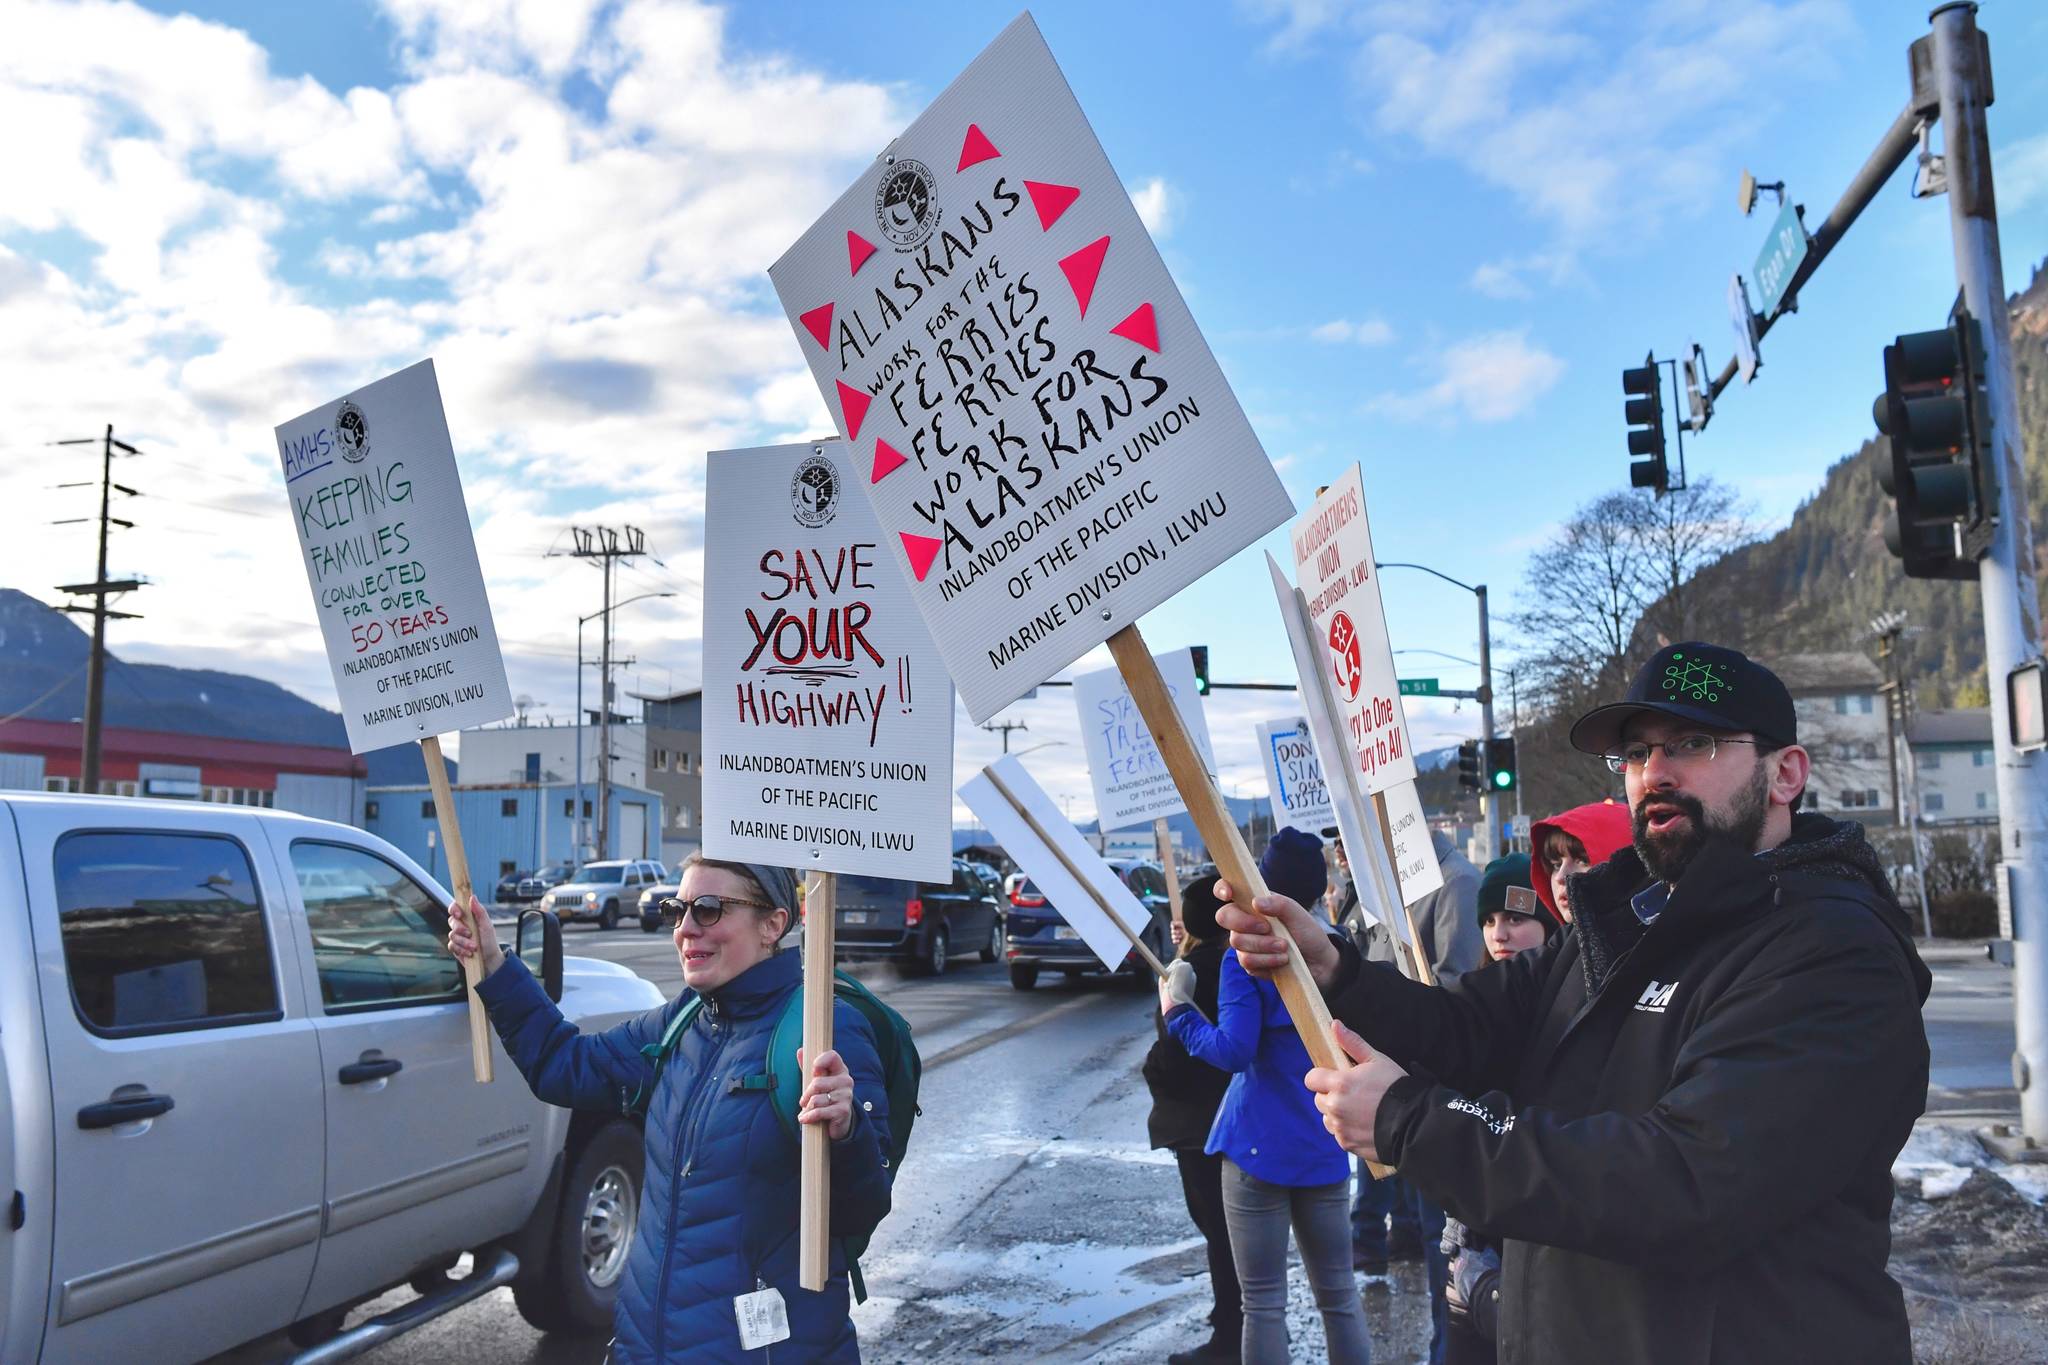 Sarah Eppon, left, and Earling Walli, right, join other ferry workers with the Inlandboatmen’s Union of the Pacific as they rally for support at 10th Street and Egan Drive on Friday, March 8, 2019. (Michael Penn | Juneau Empire)